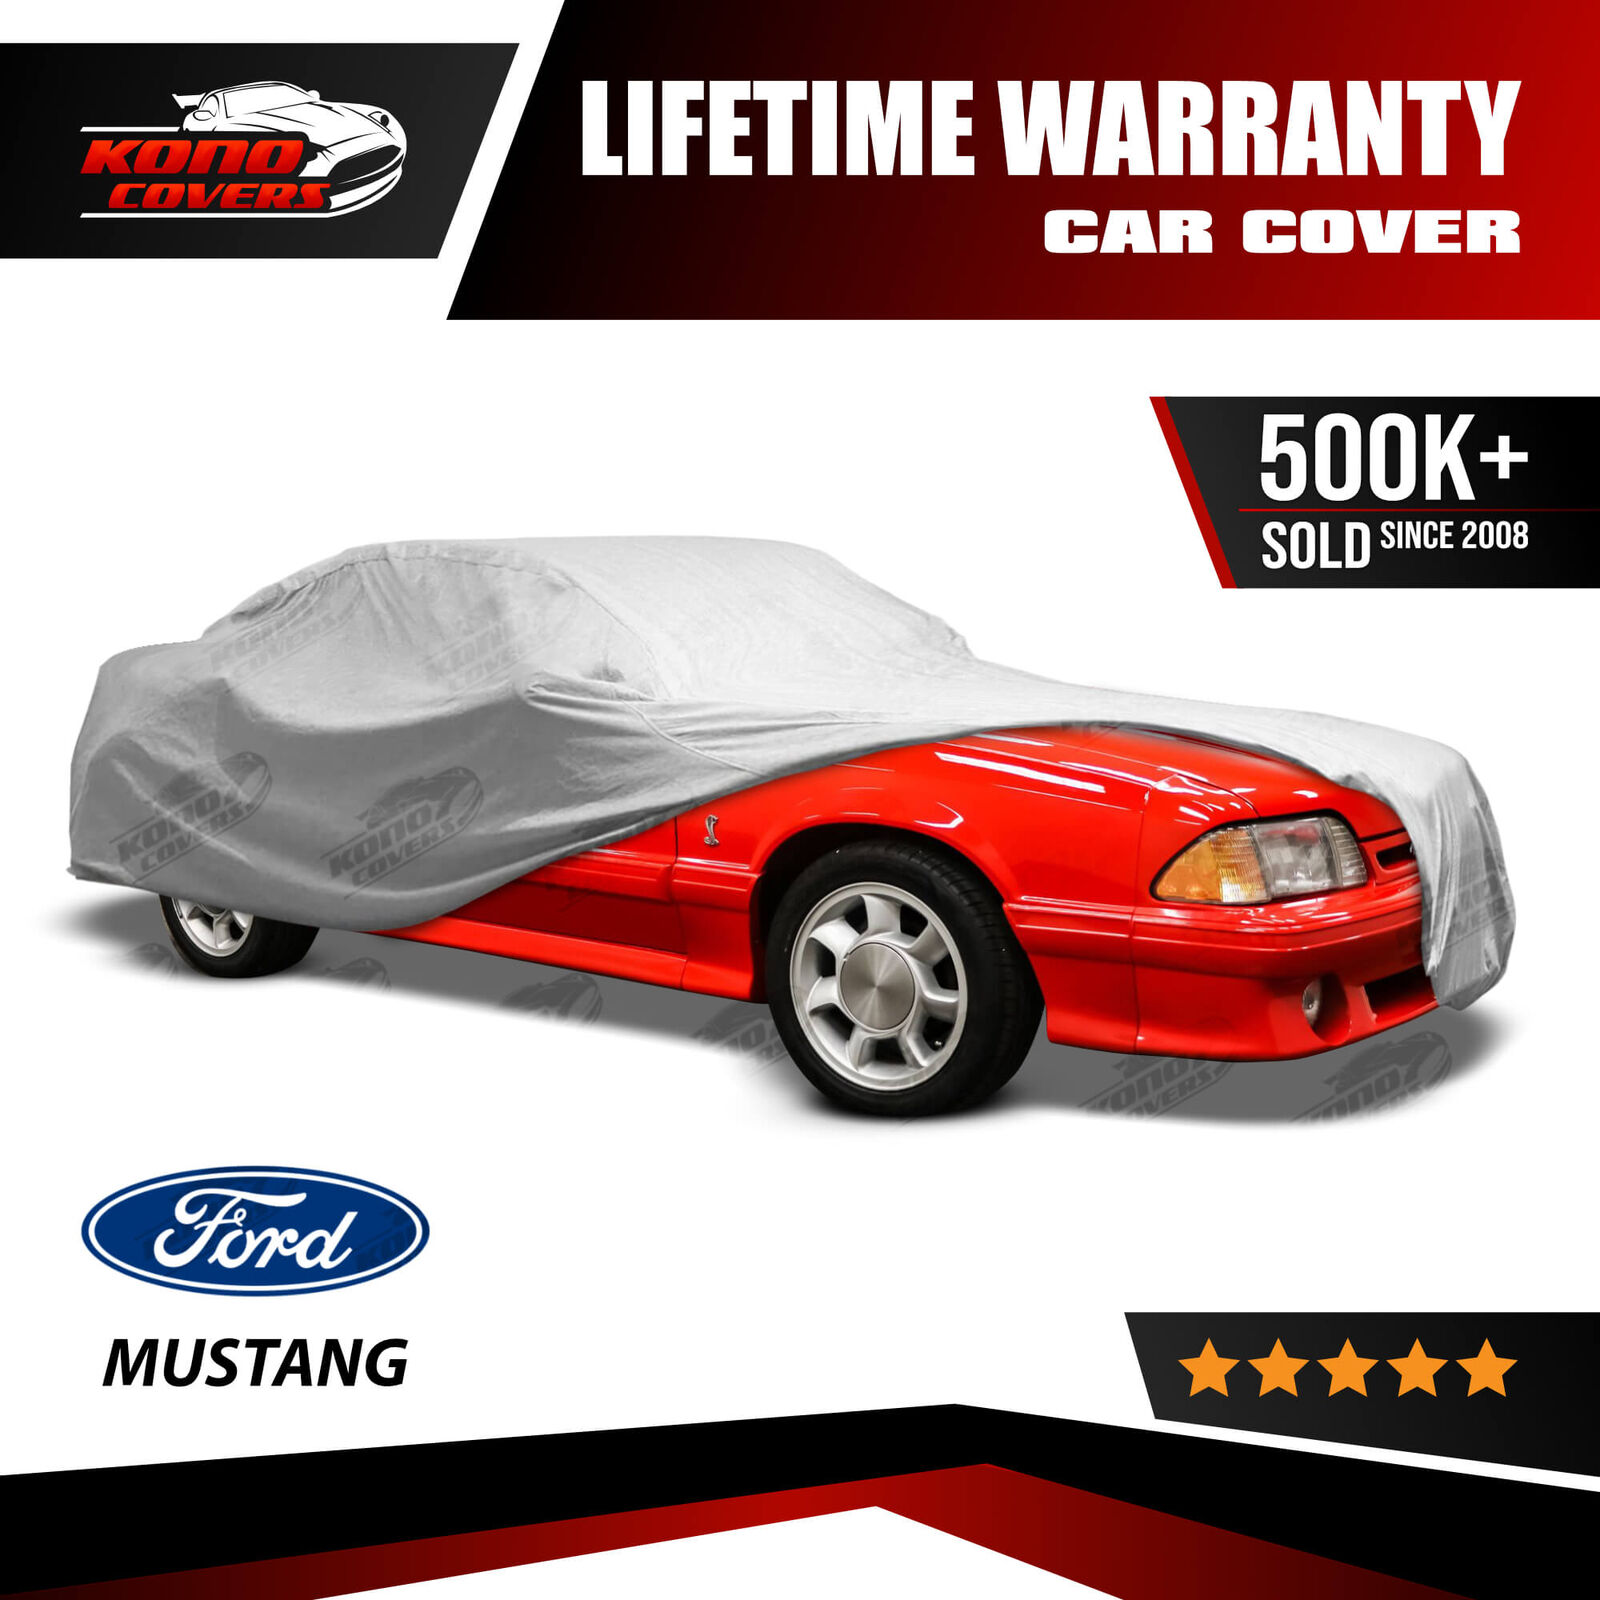 Ford Mustang Convertible Gt Cobra 5 Layer Car Cover 1989 1990 1991 1992 1993